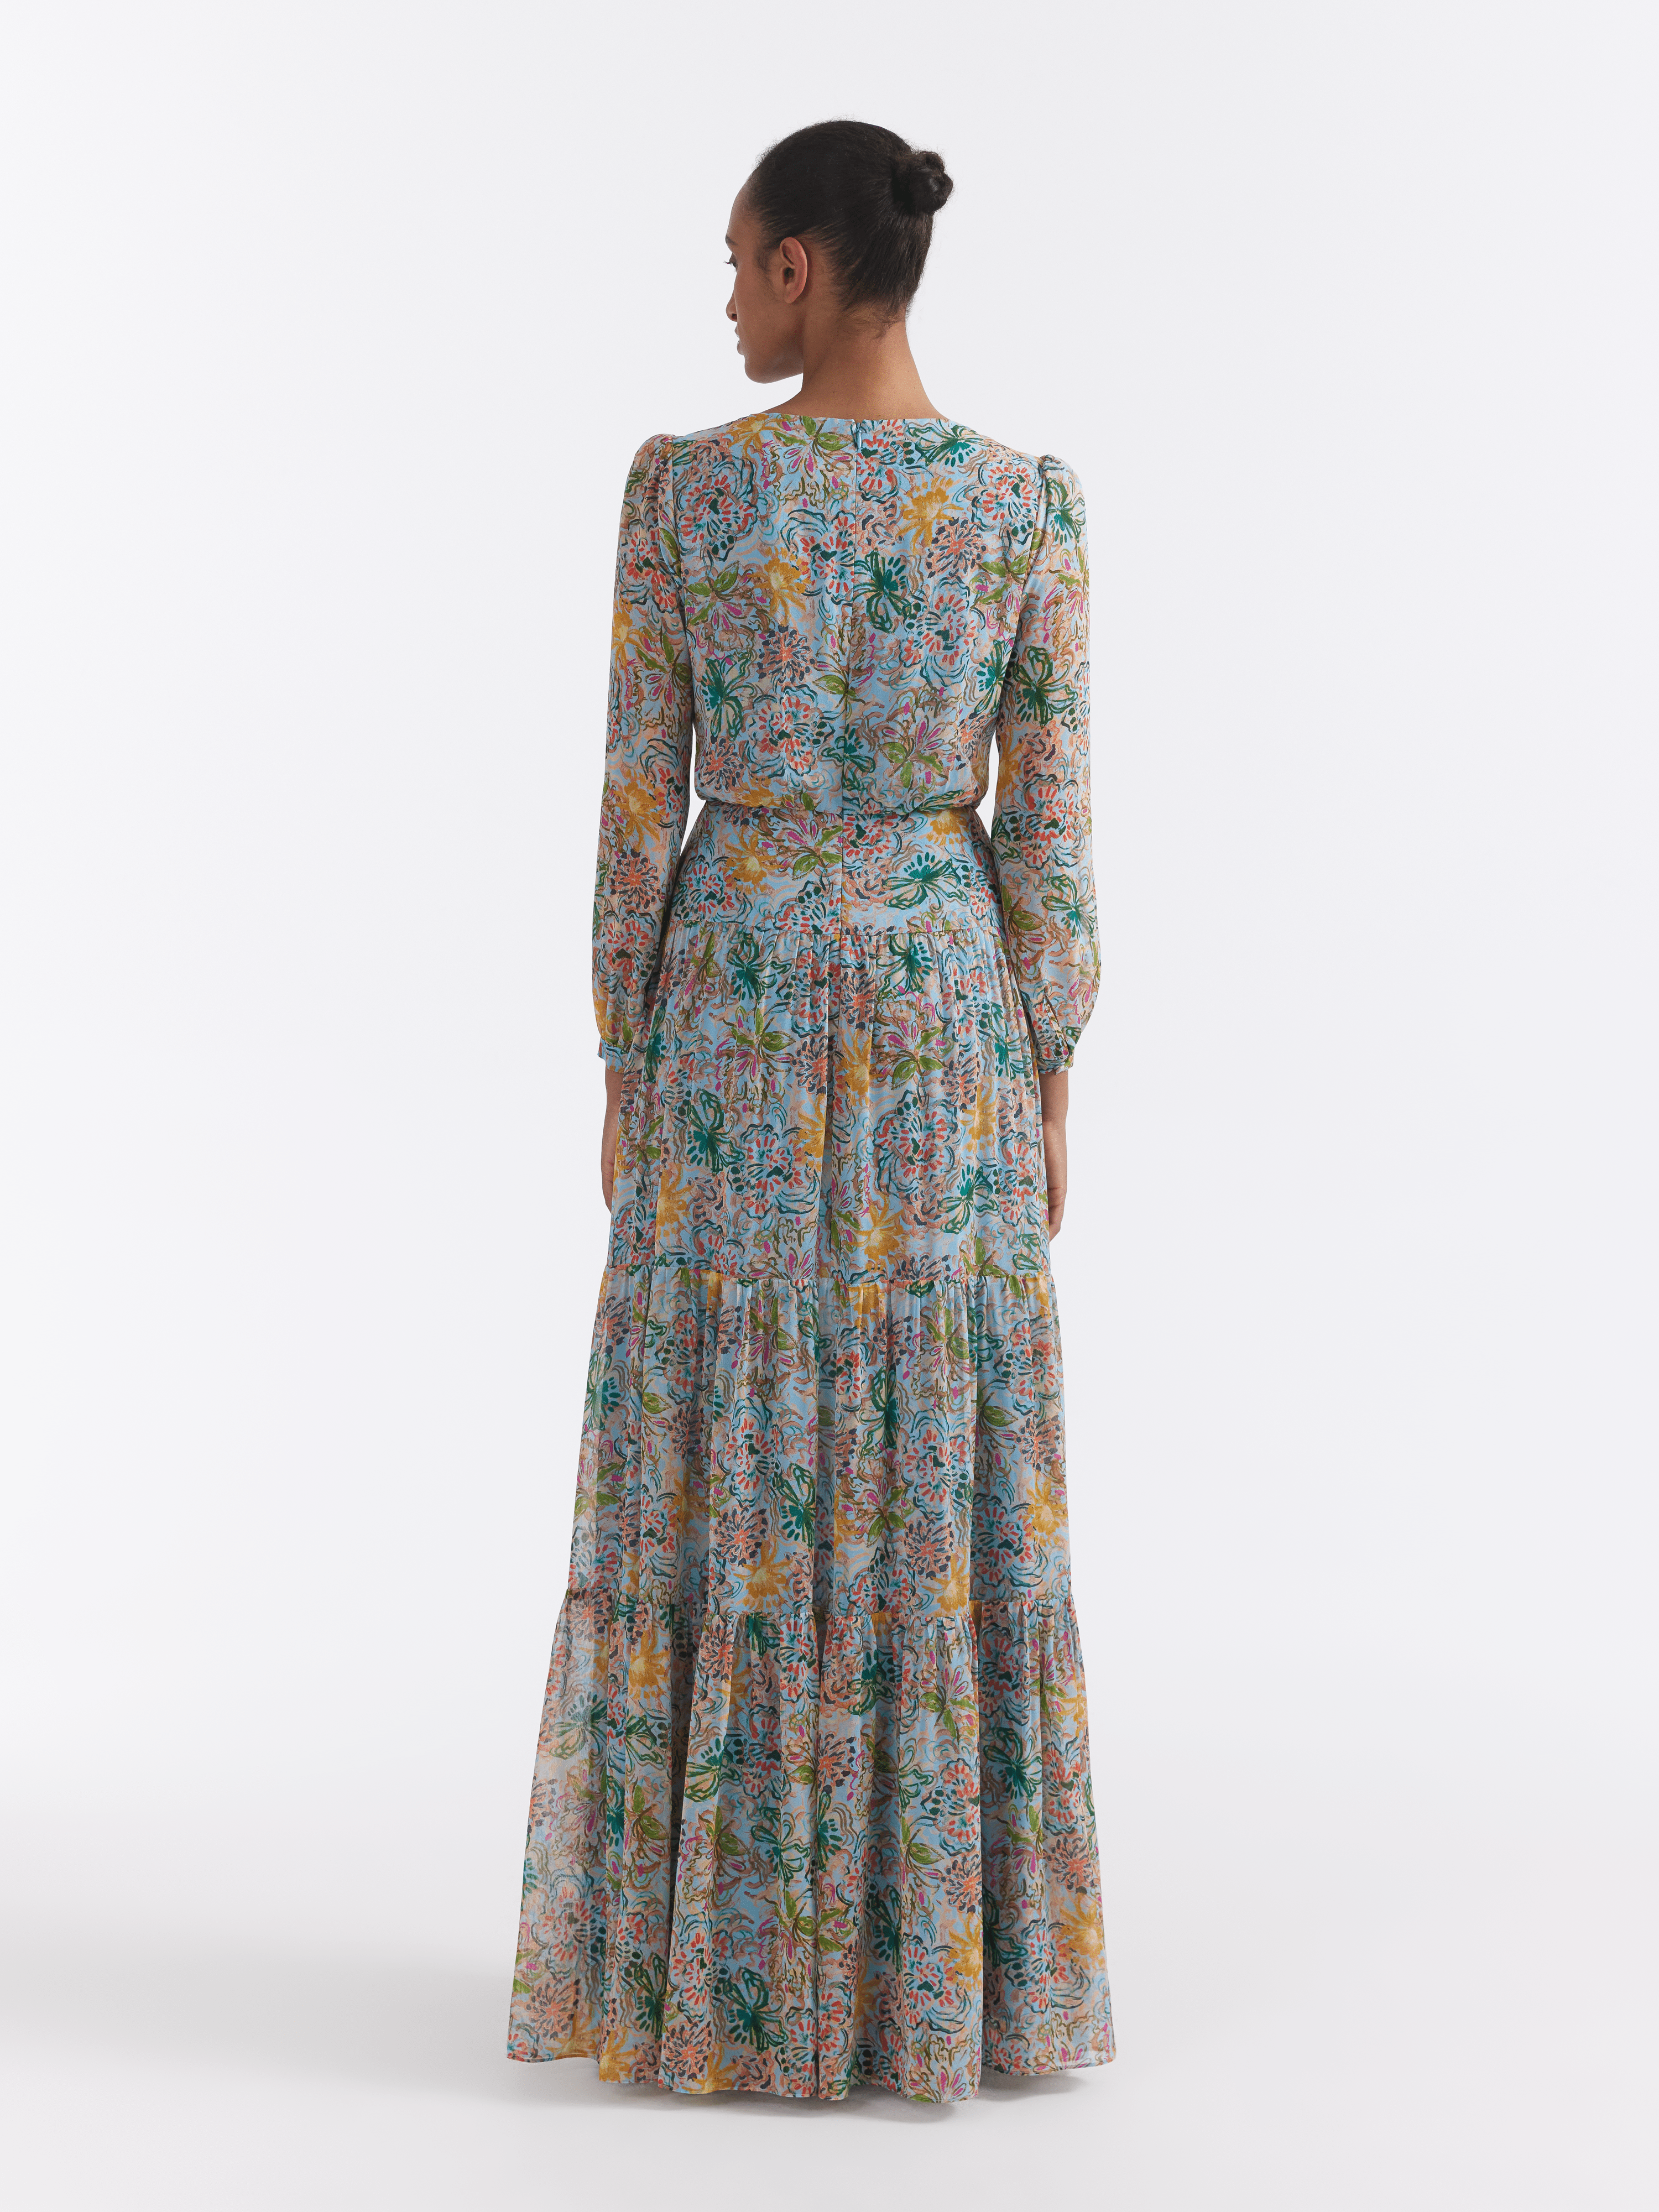 Isabel Long Dress in Orchard Sky